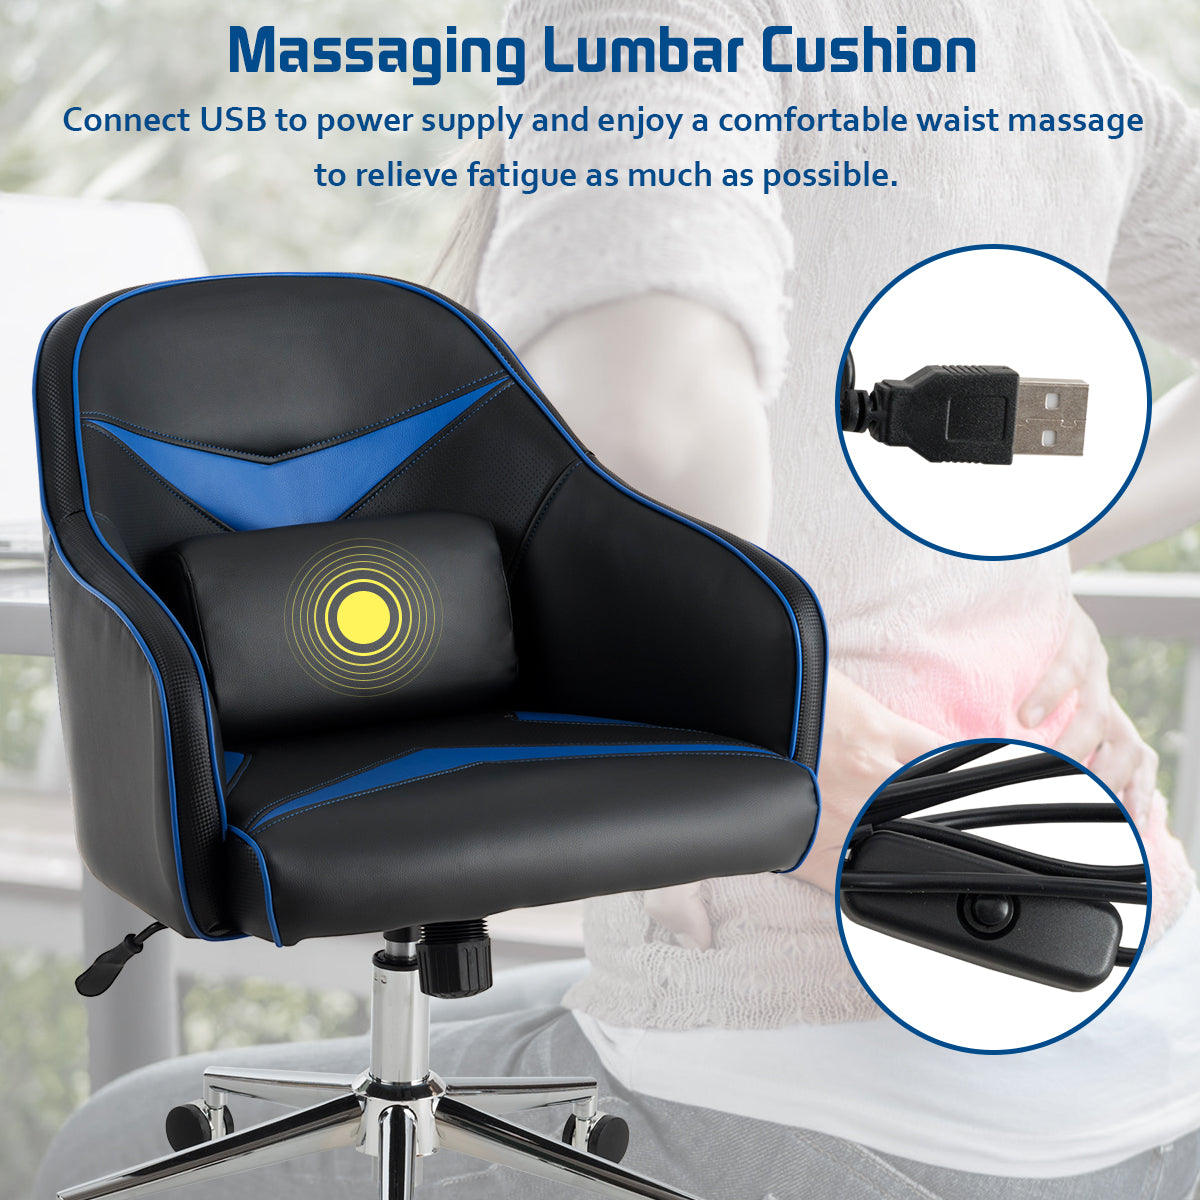 Giantex PU Leather Gaming Chair, Adjustable Height Mid-back Armchair w/ Massage Lumbar Pillow